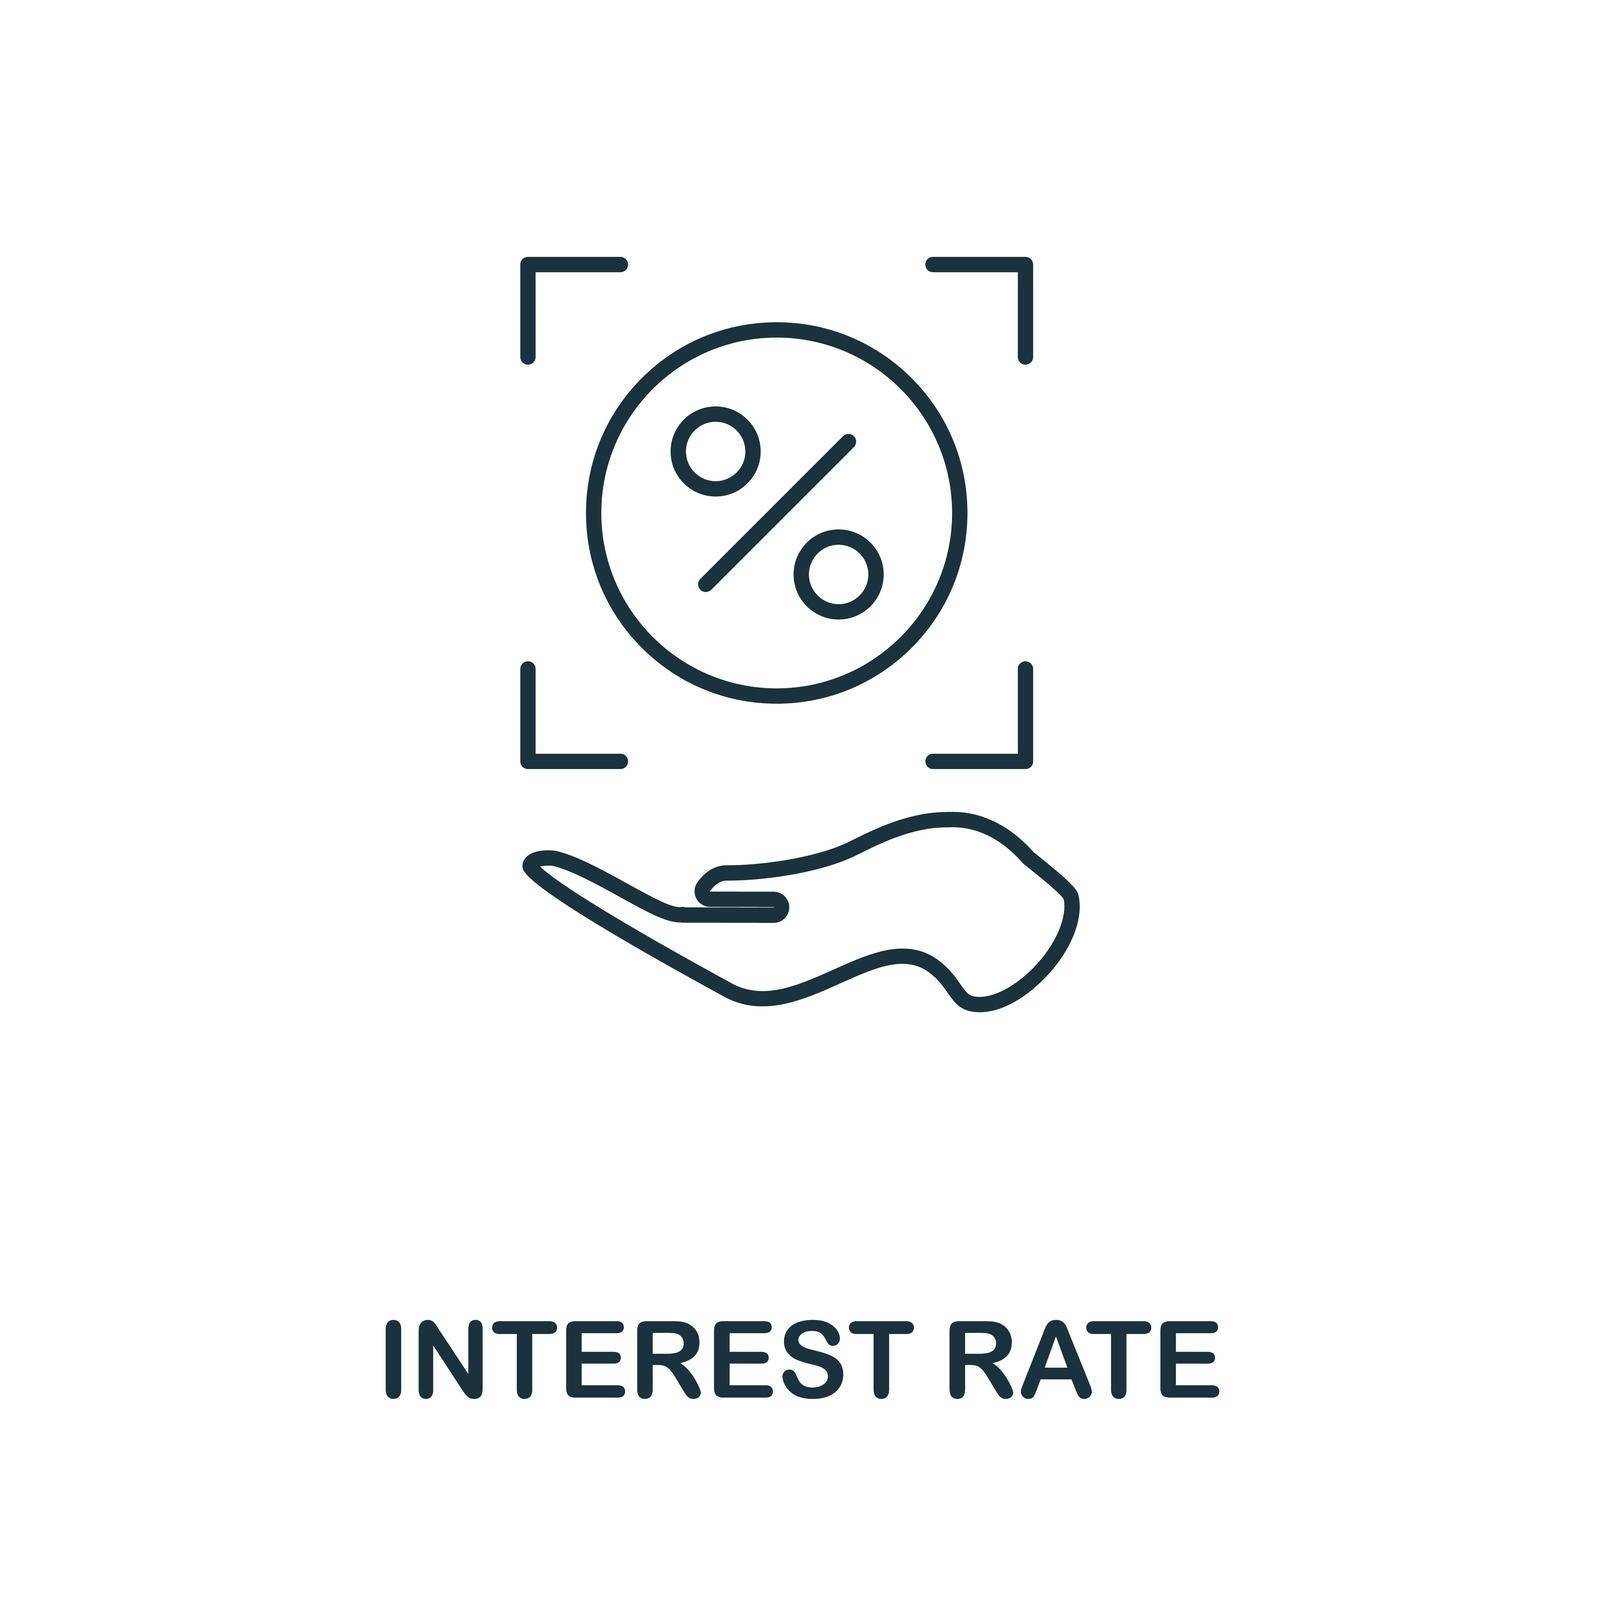 Interest Rate line icon. Monochrome simple Interest Rate outline icon for templates, web design and infographics by simakovavector